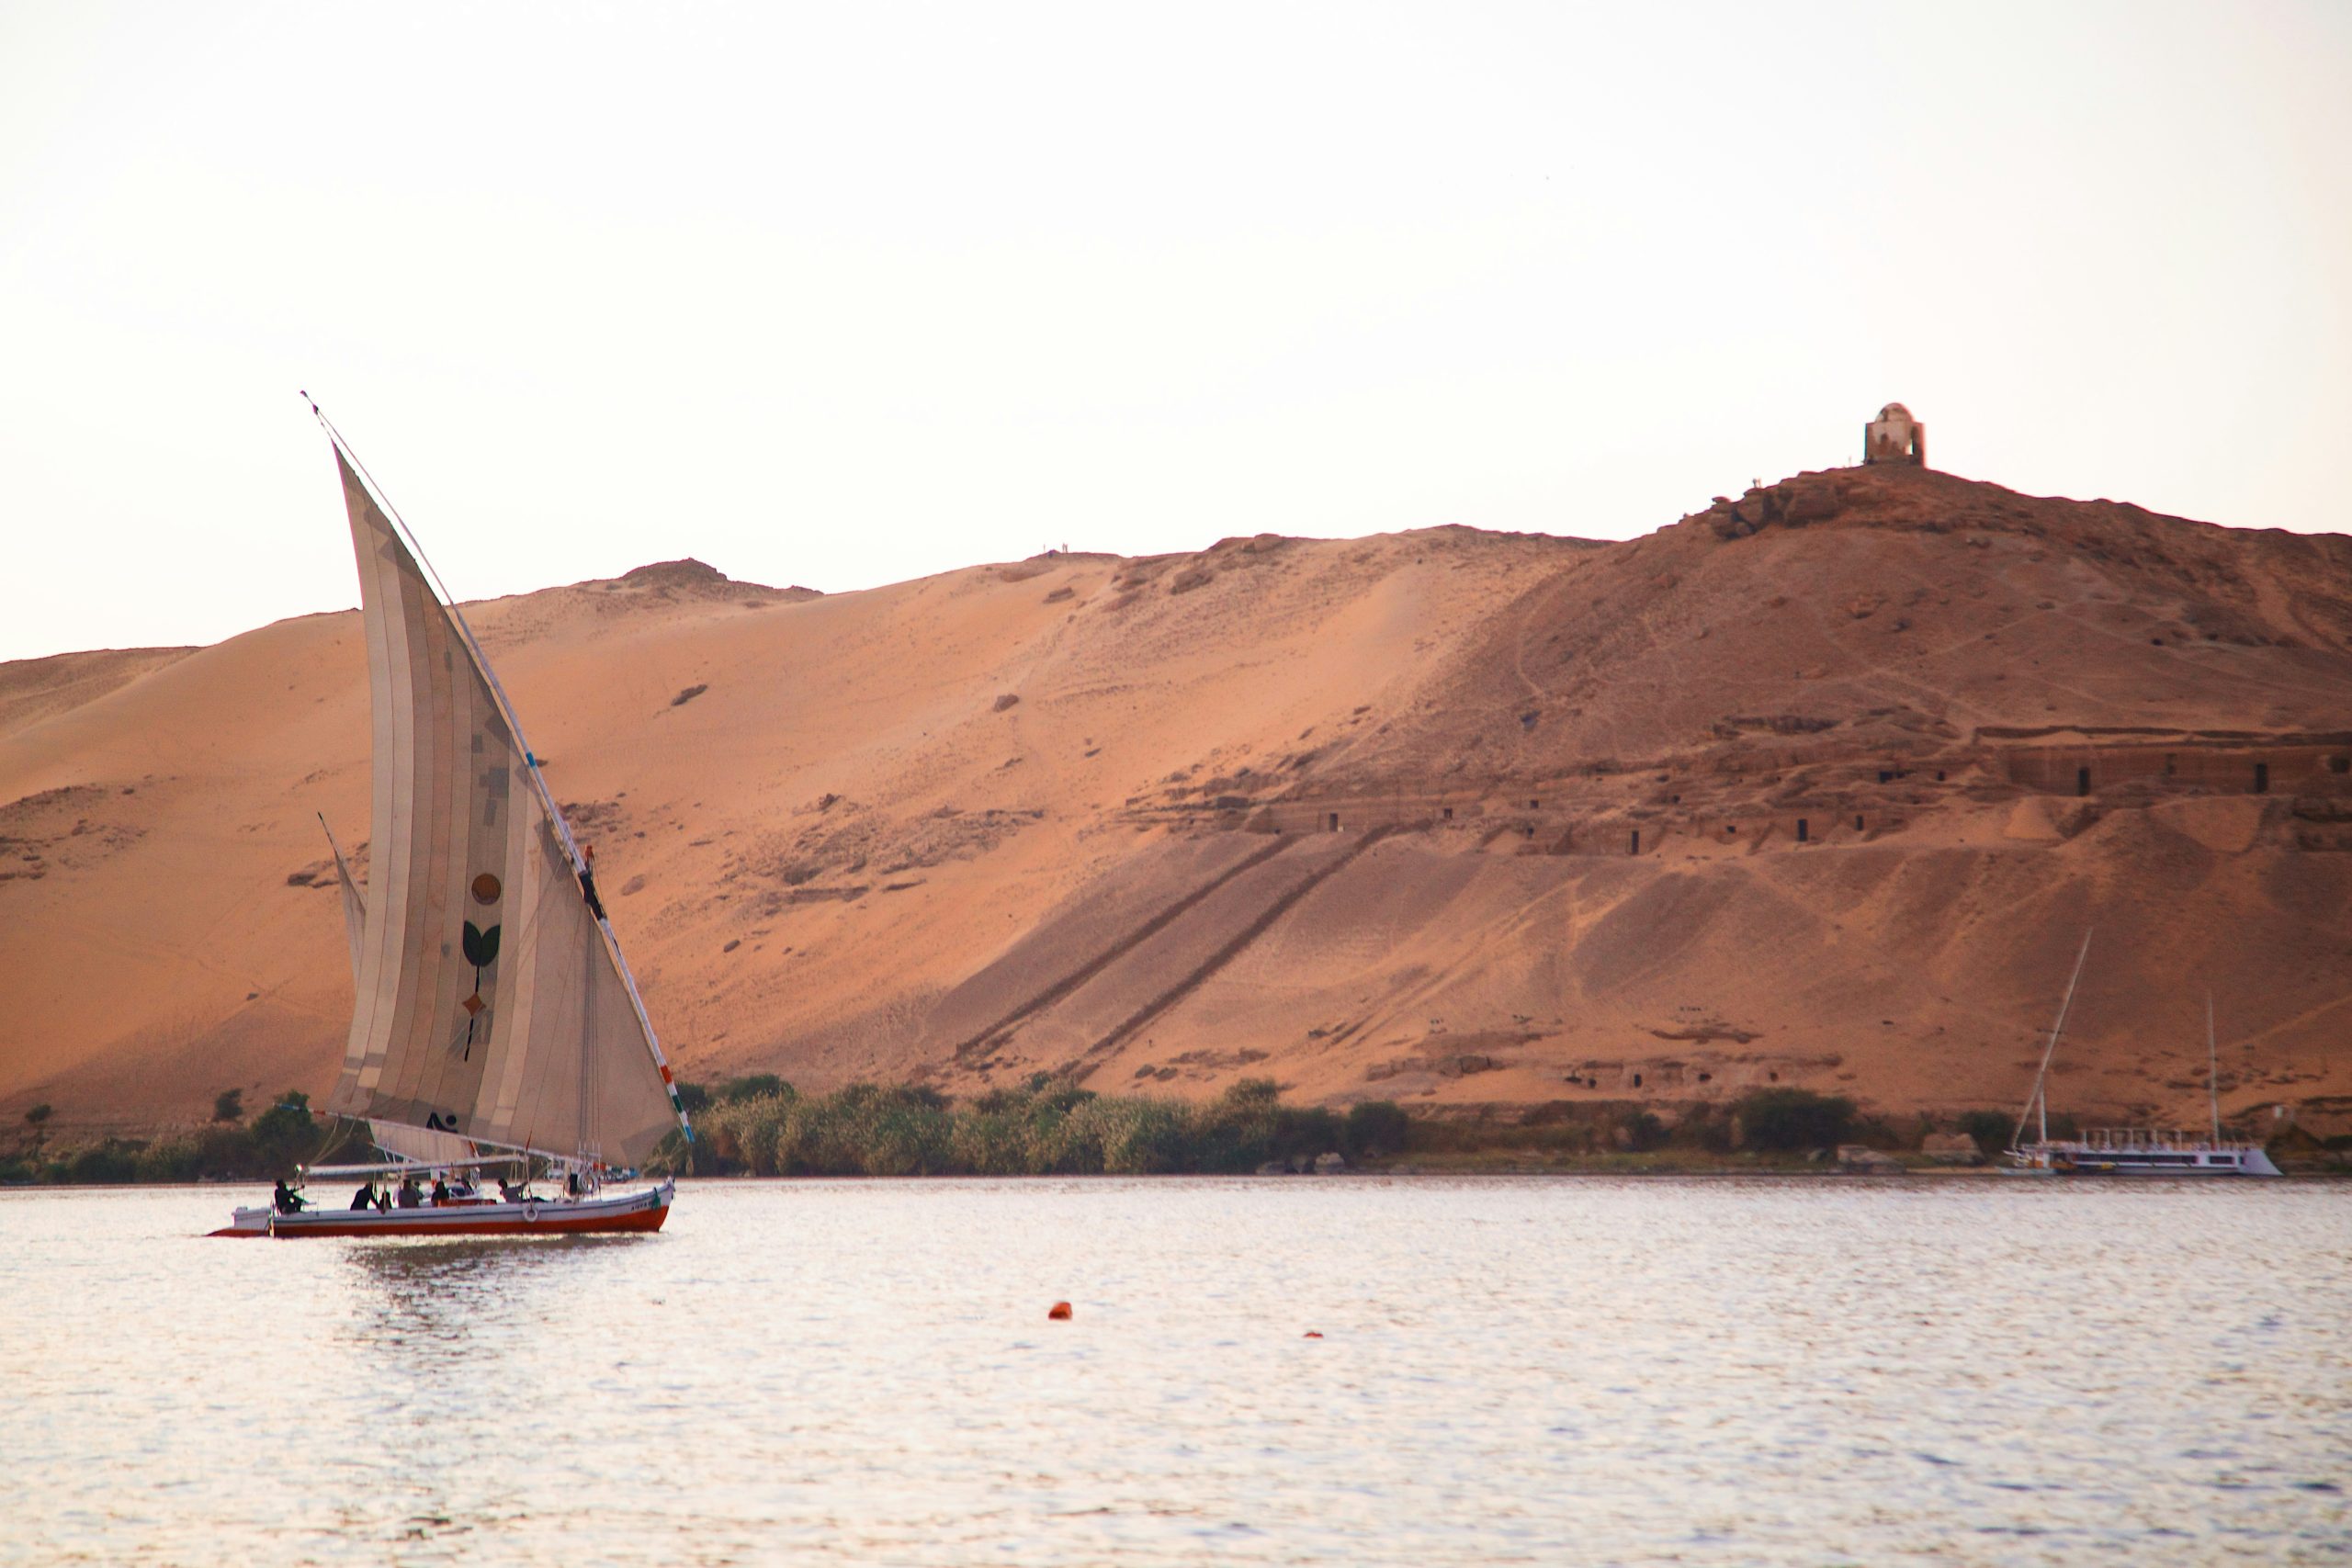 experience the ultimate journey with a nile cruise. discover ancient wonders and stunning landscapes along the iconic nile river in egypt.